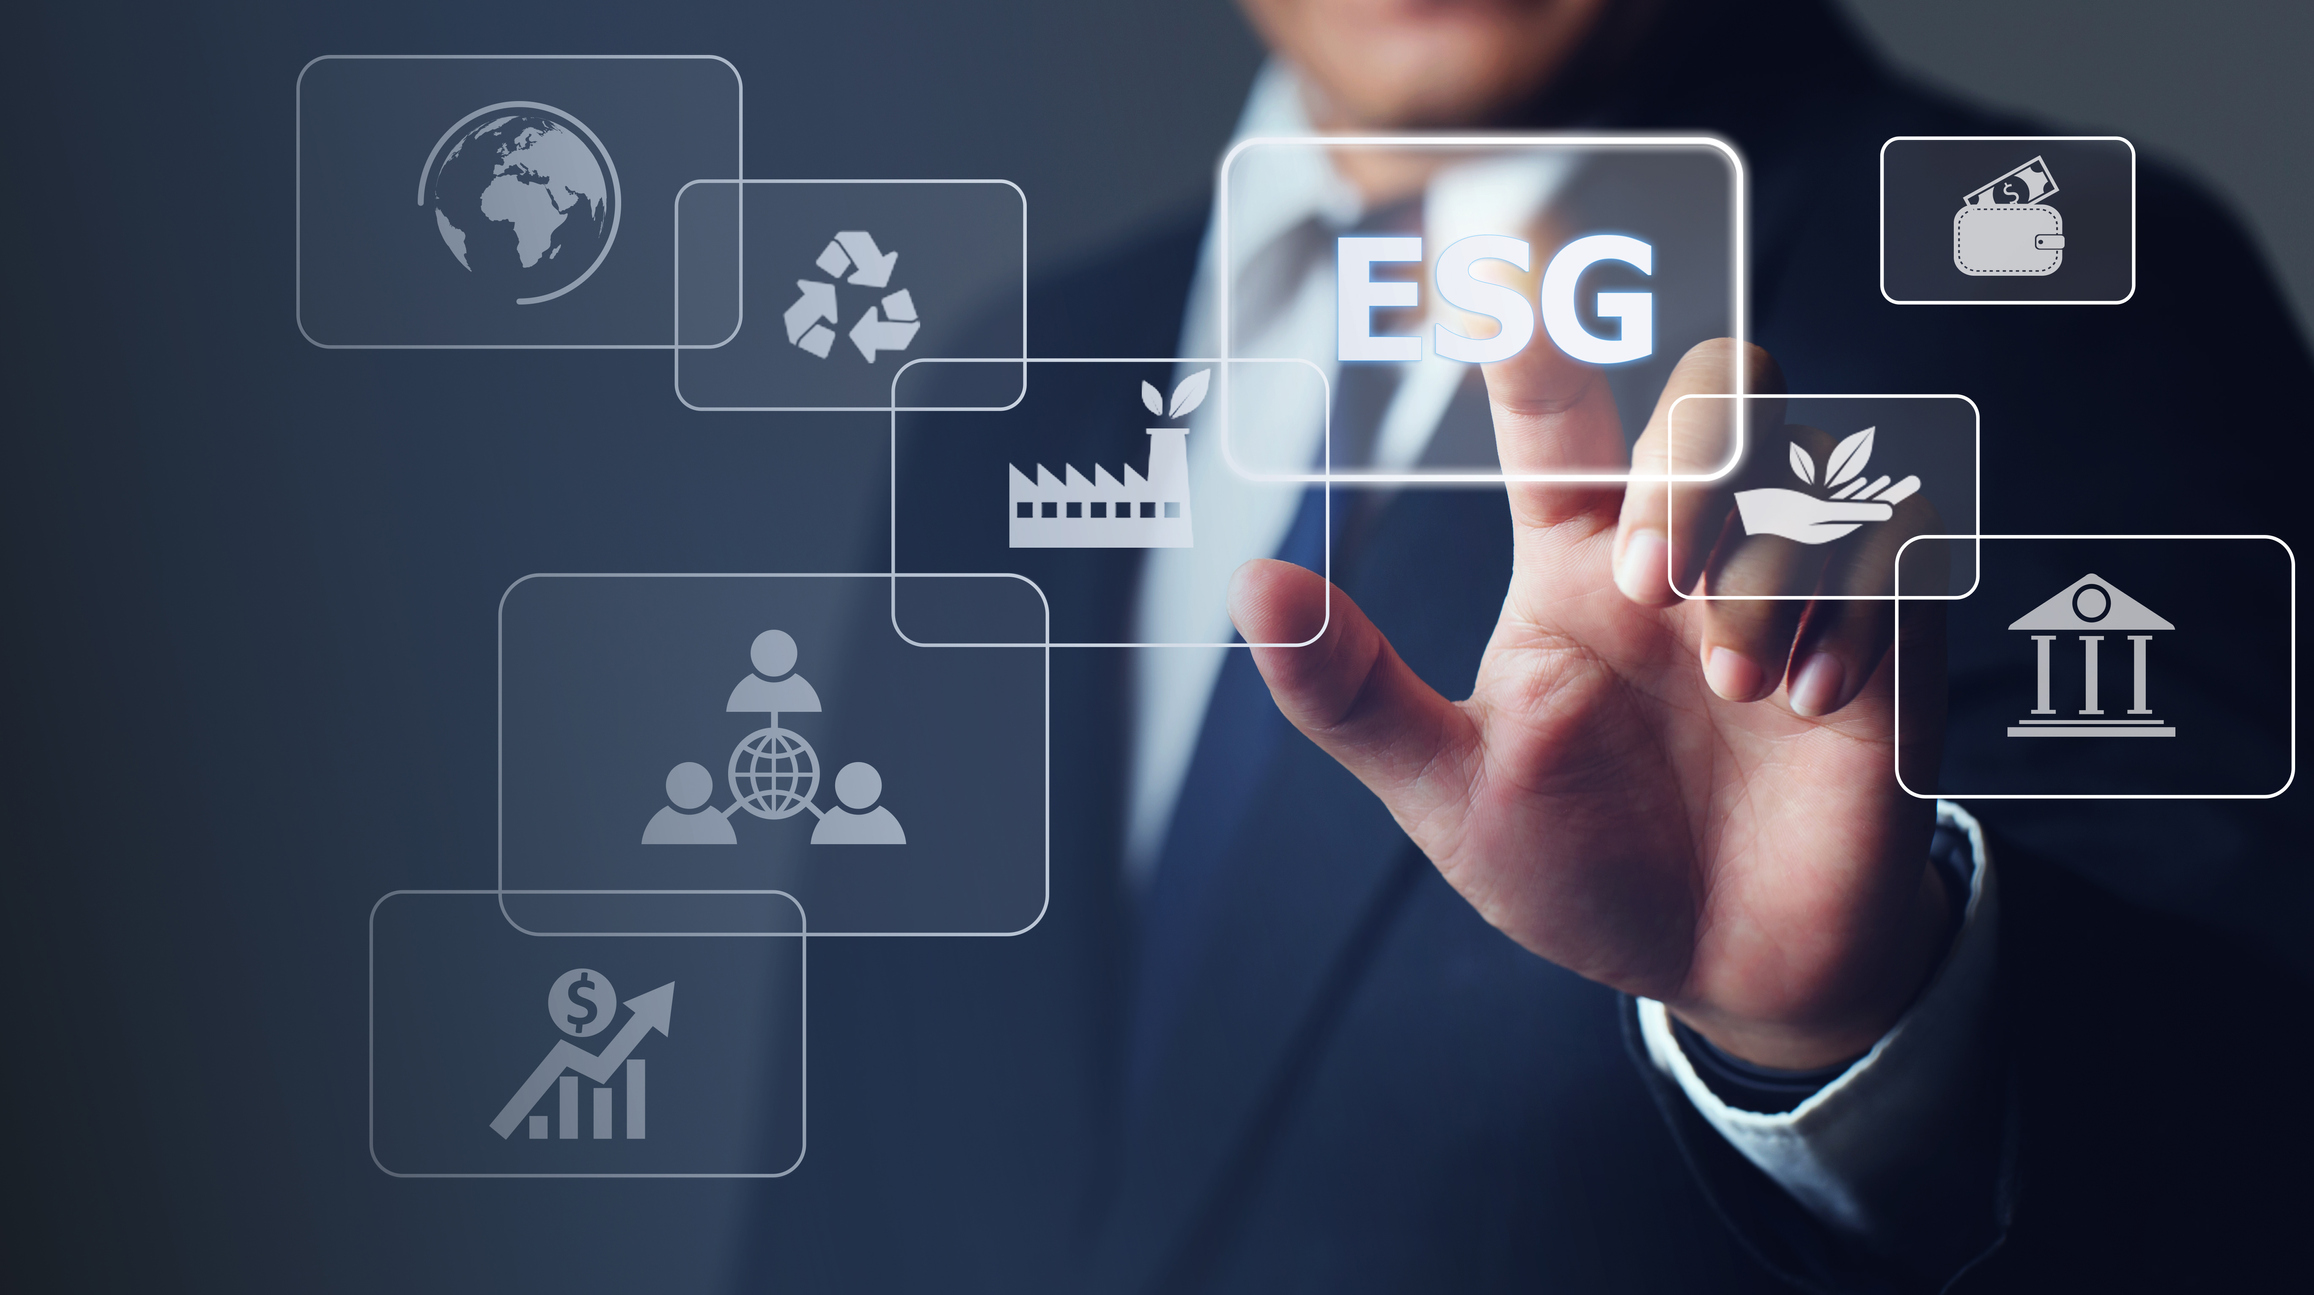 Businessman touching button ESG on-screen with connected virtual icons over the background.ESG environmental social governance business strategy investing concept.